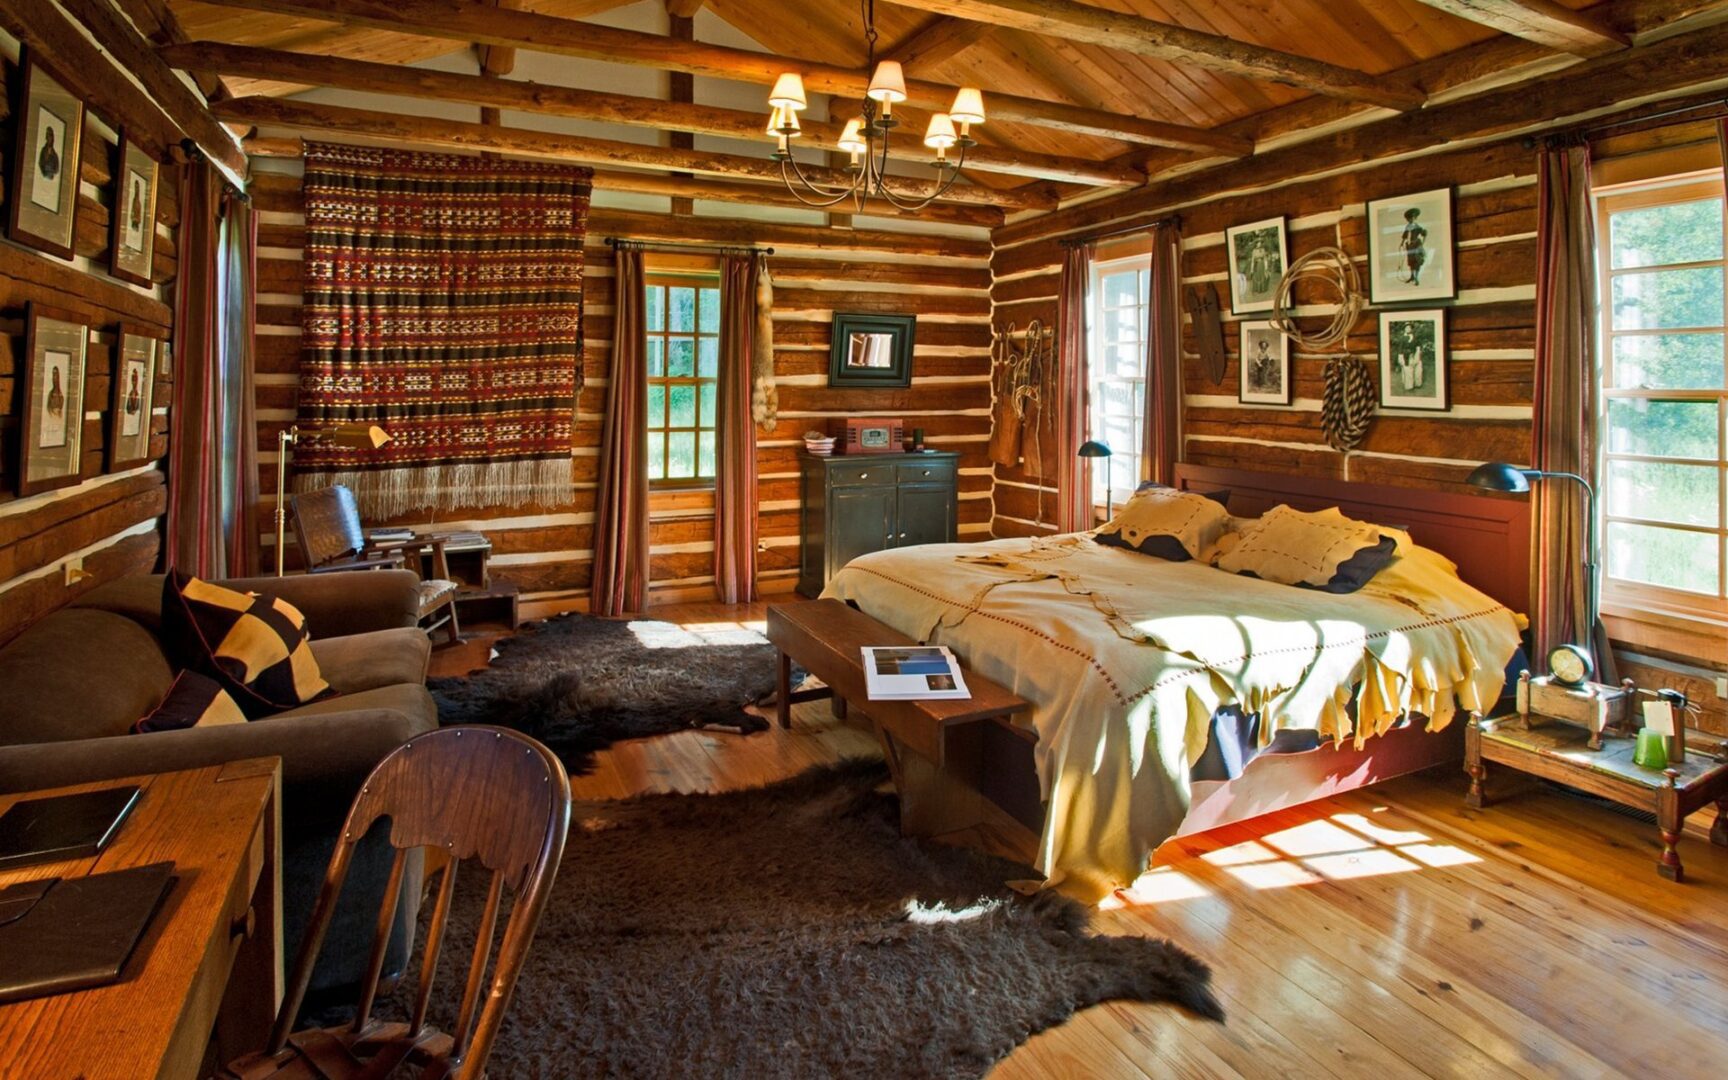 A cozy log cabin with a rustic bedroom.